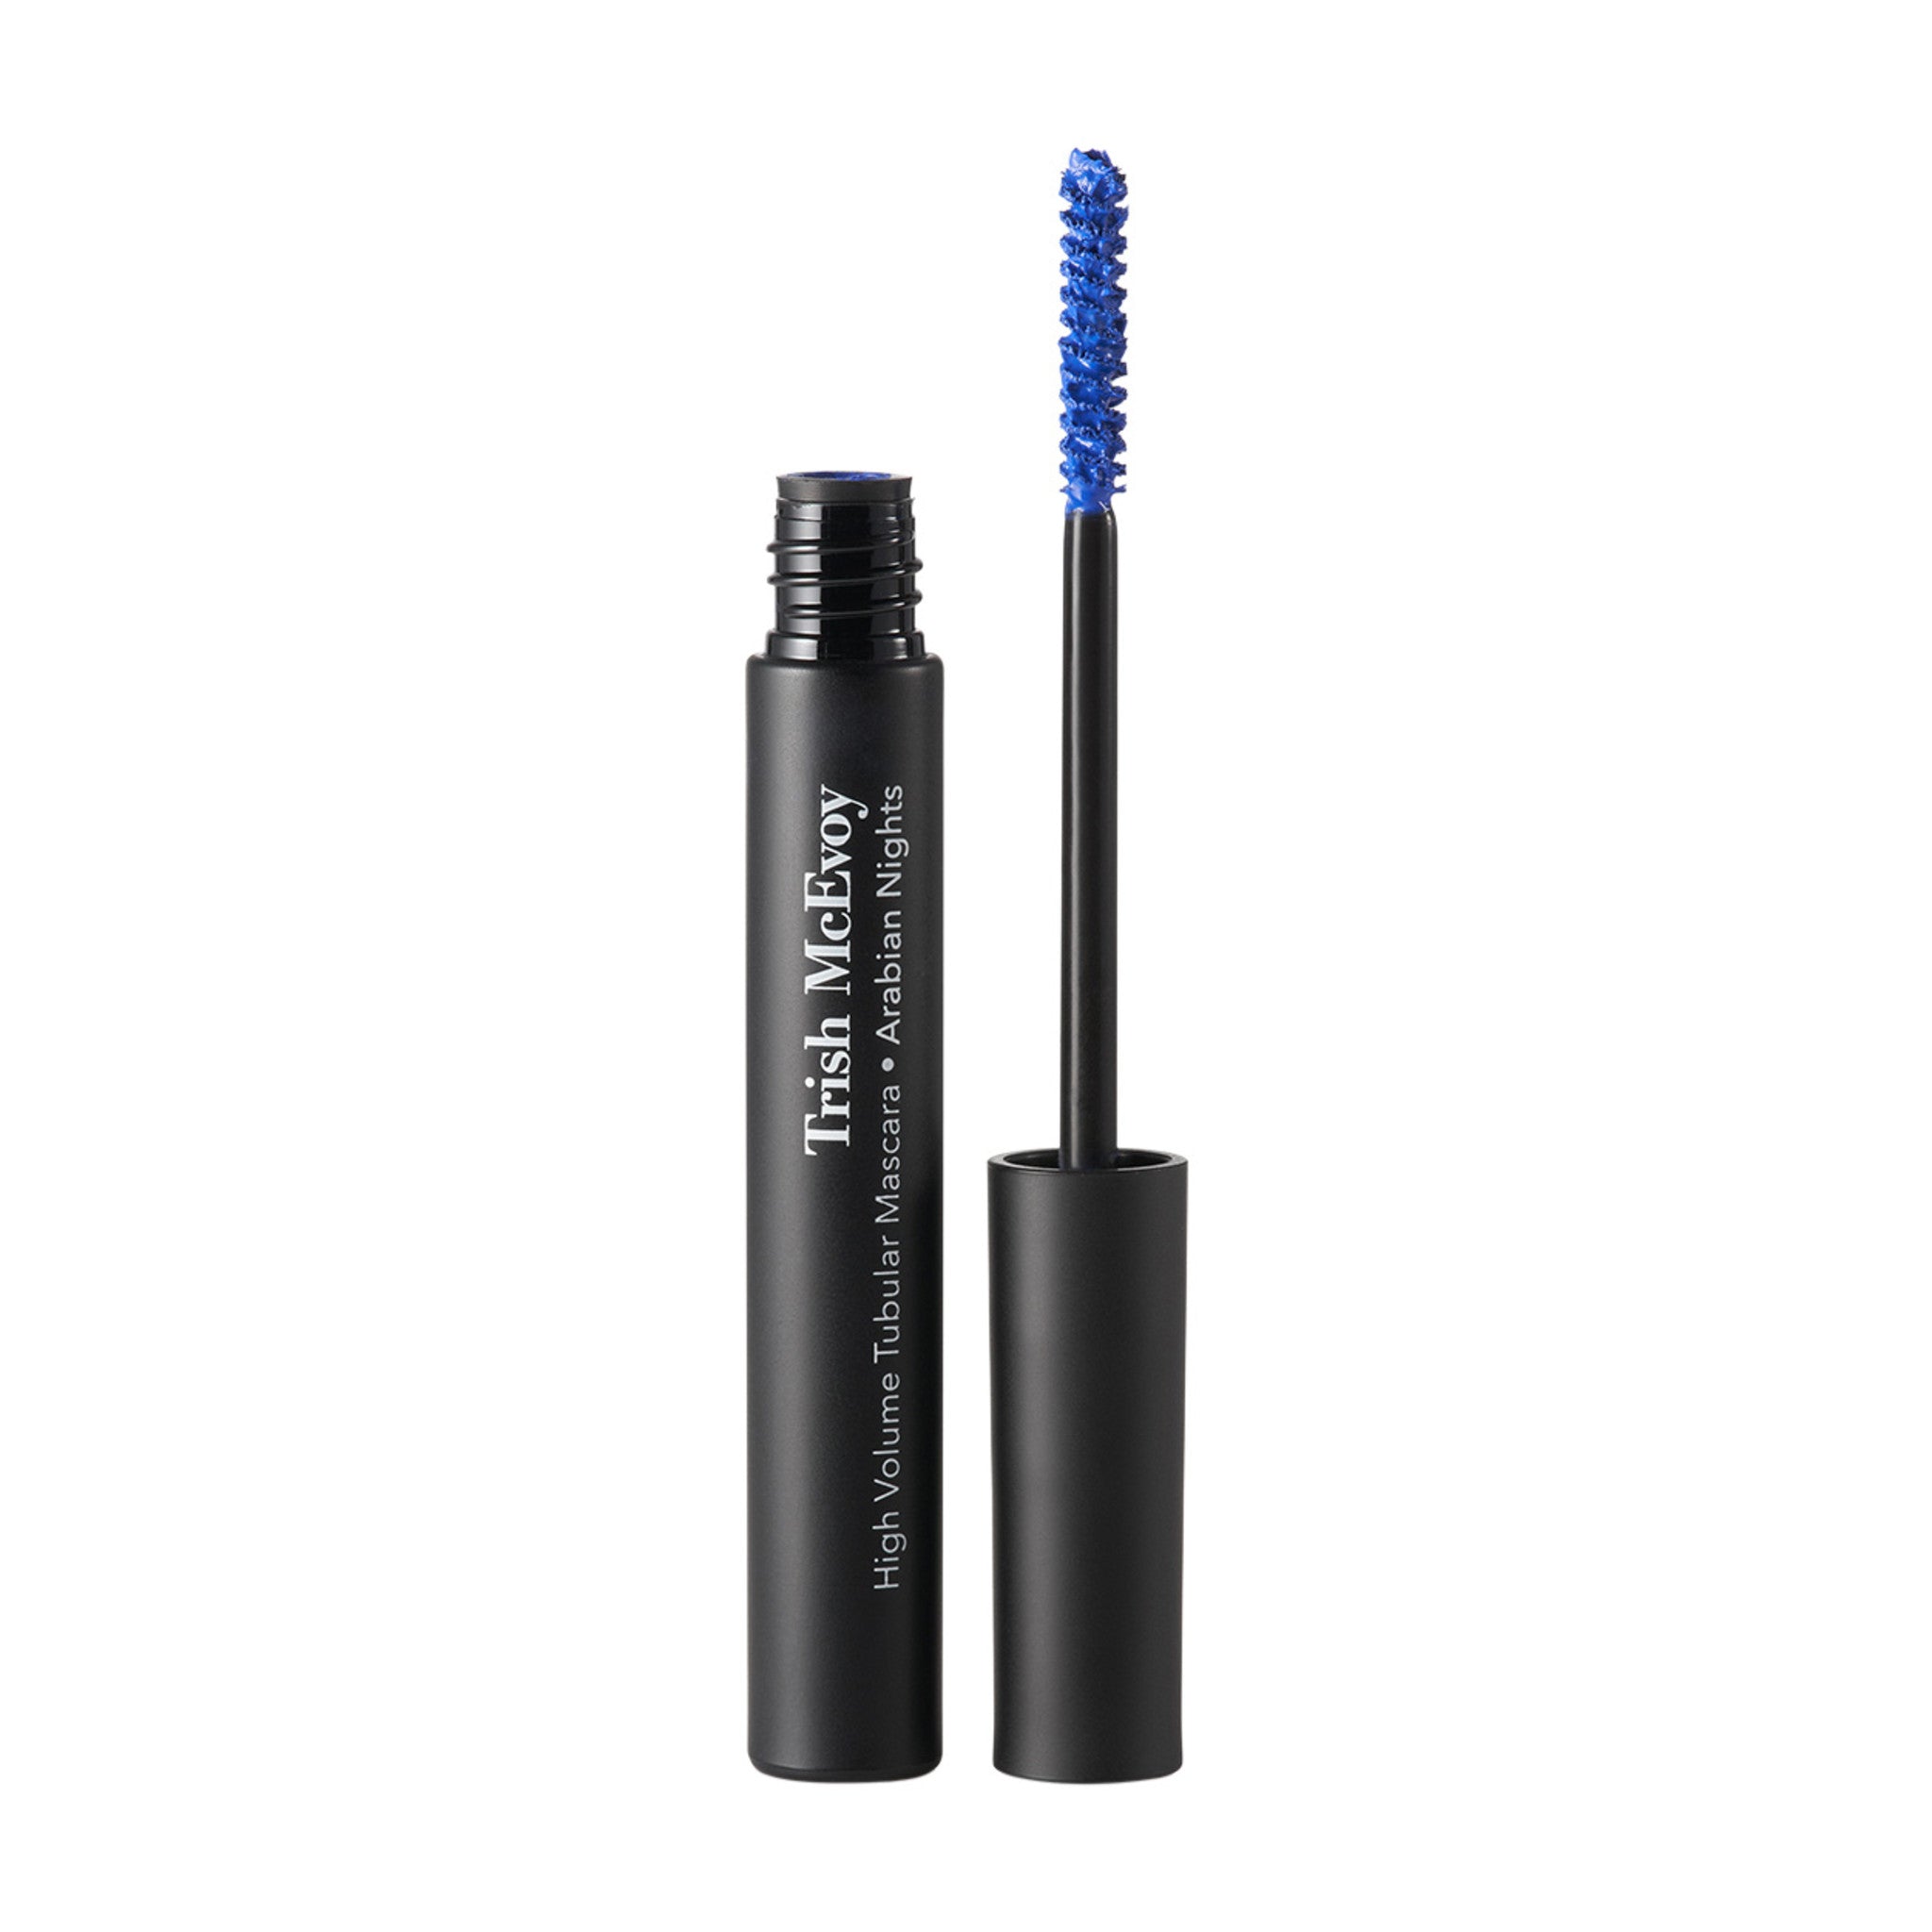 Trish McEvoy High Volume Tubular Mascara Color/Shade variant: Arabian Nights (Deep Navy) main image. This product is in the color blue